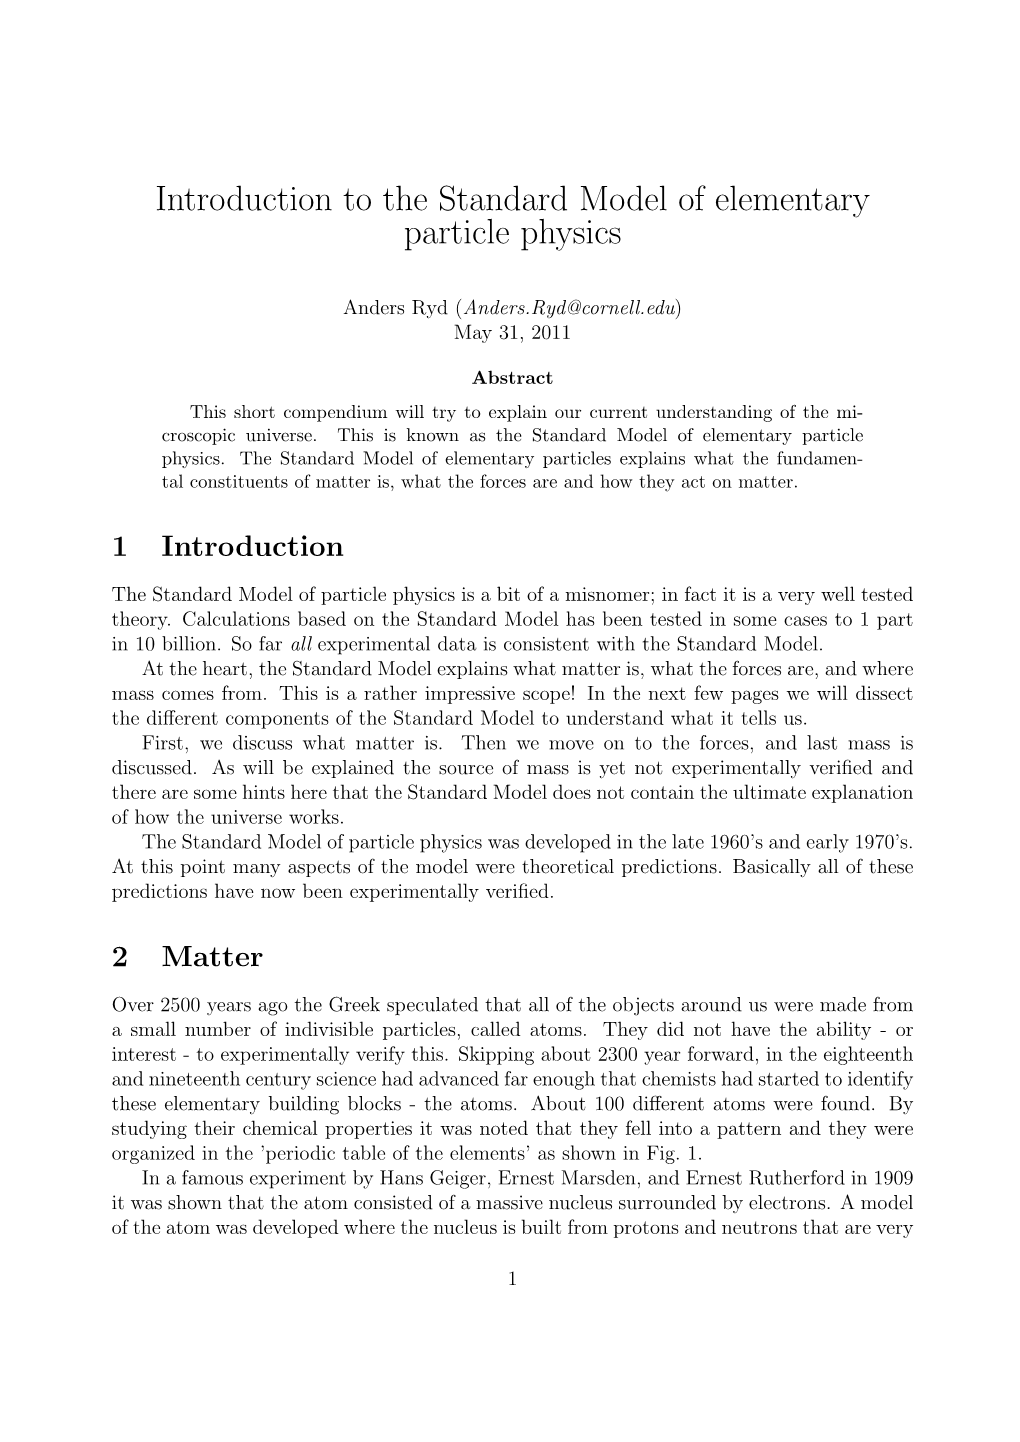 Introduction to the Standard Model of Elementary Particle Physics